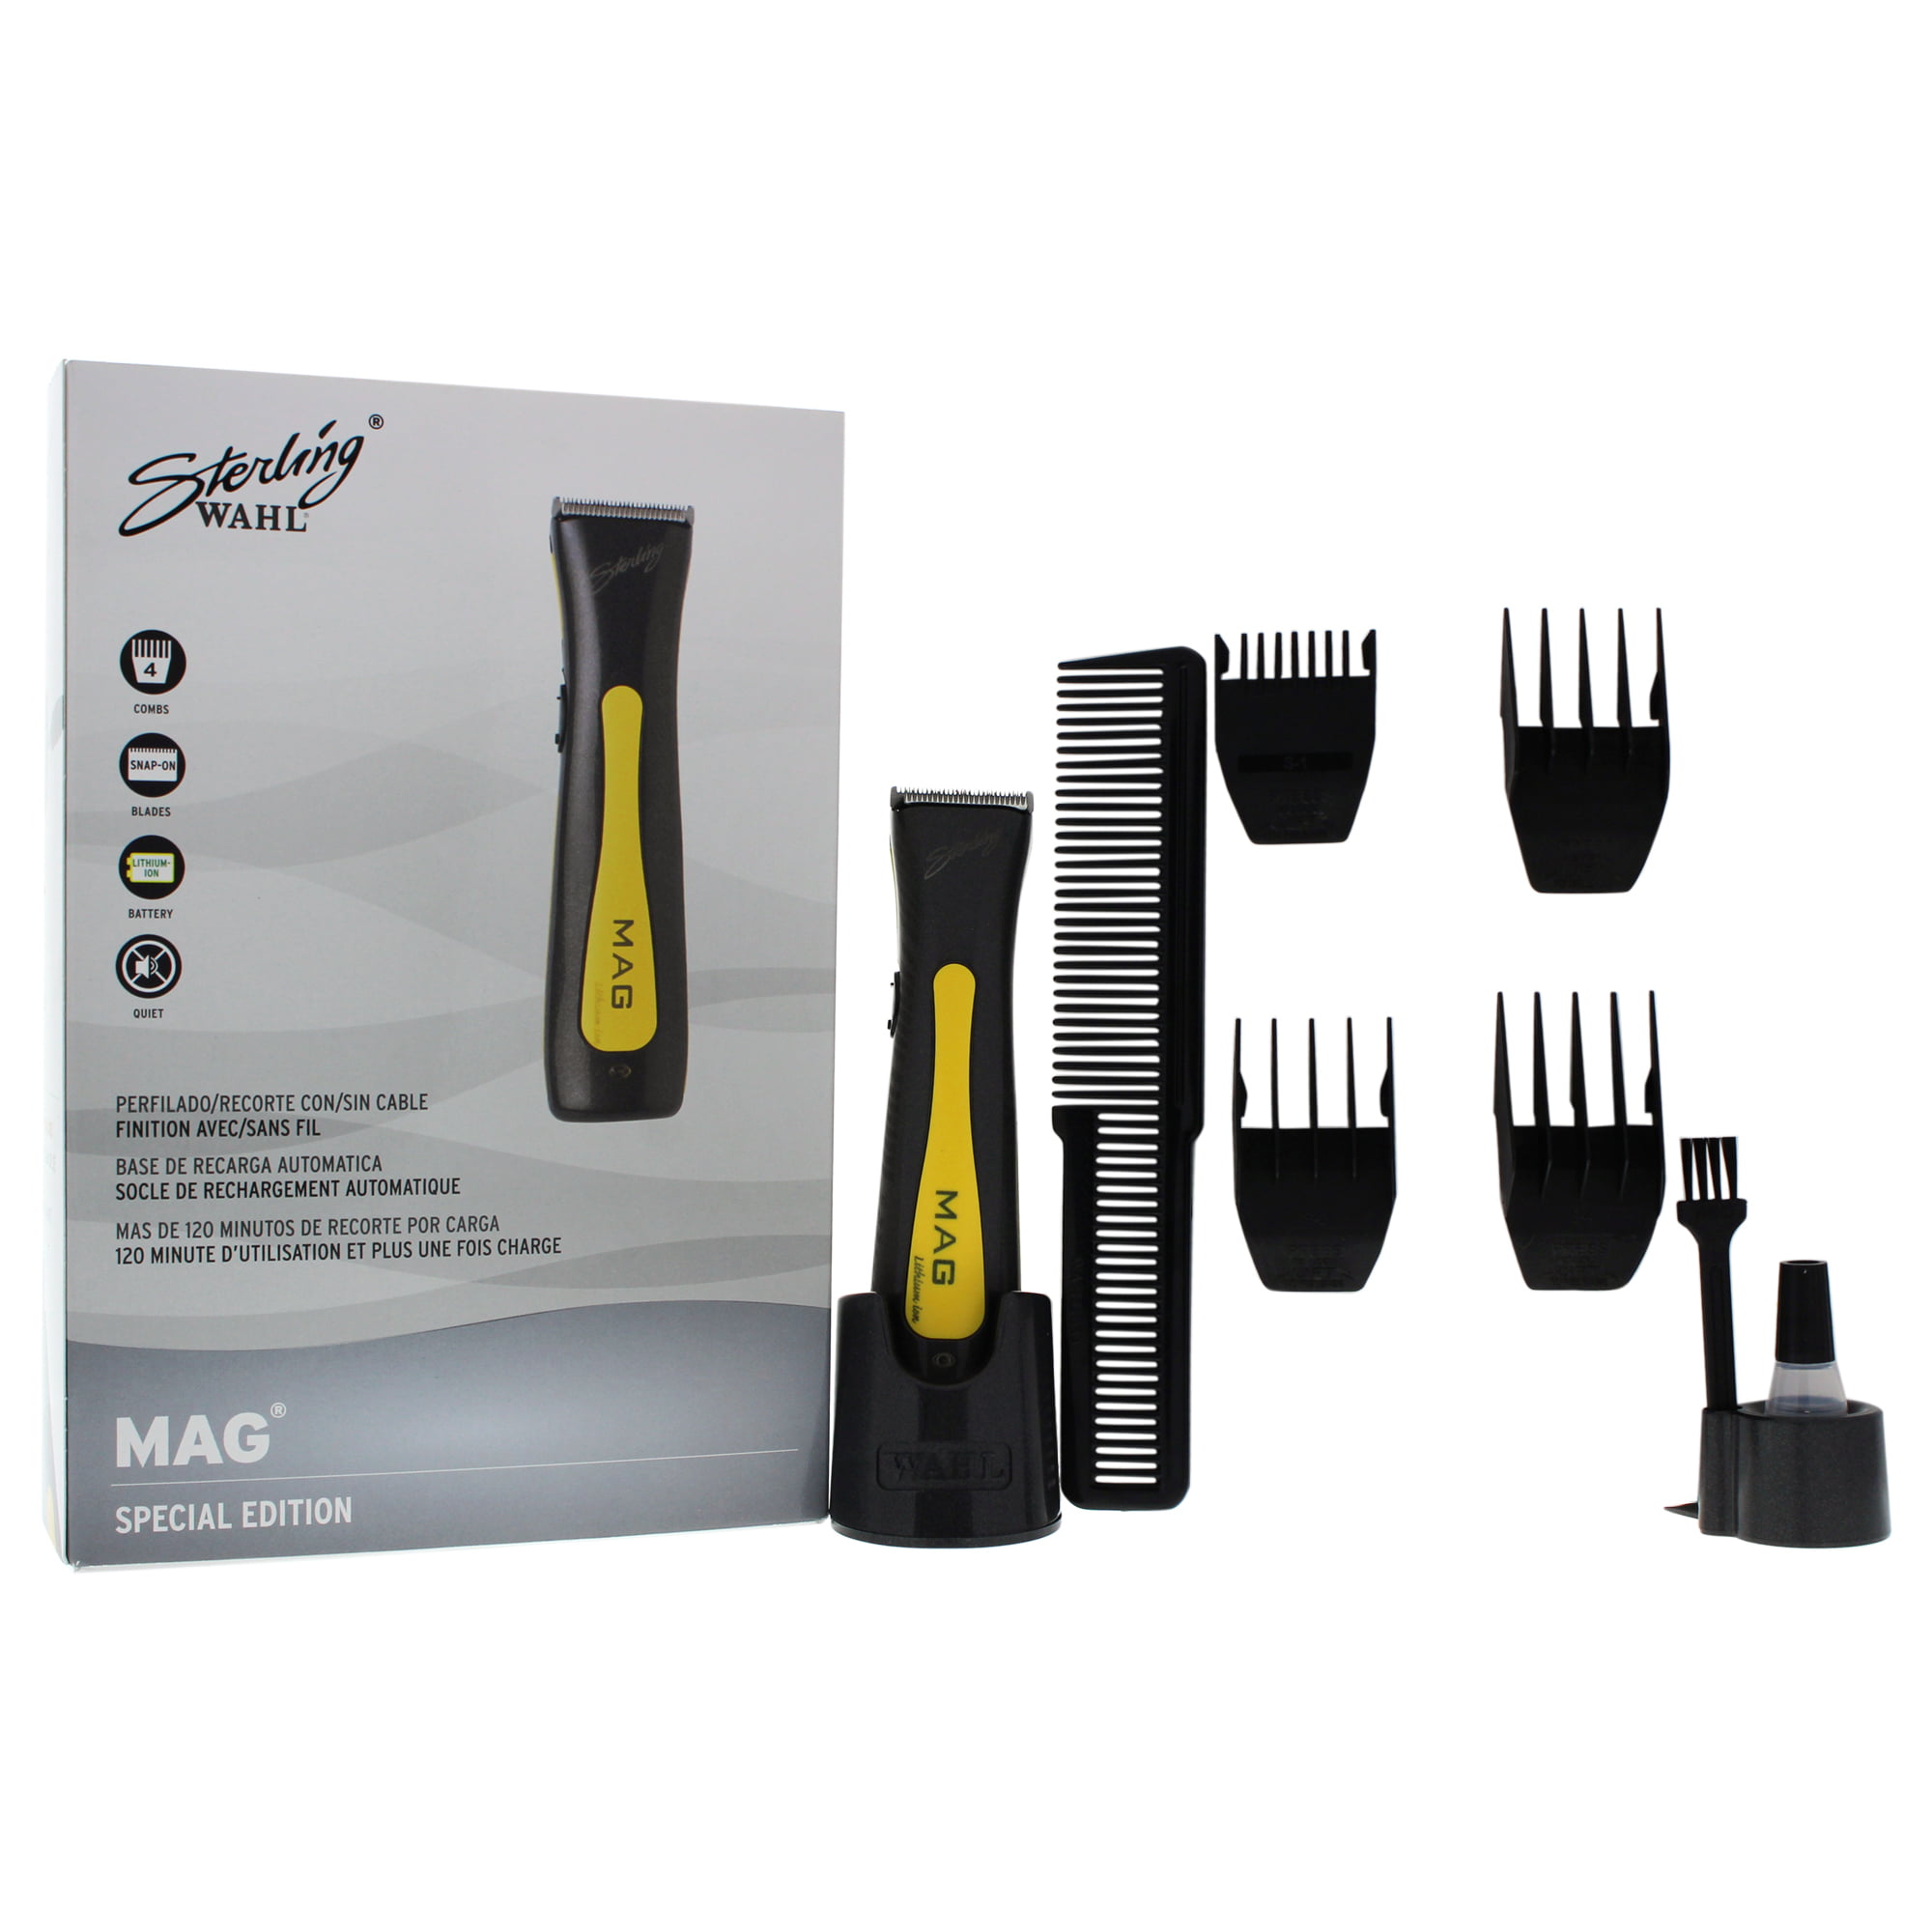 wahl sterling mag 8779 stores